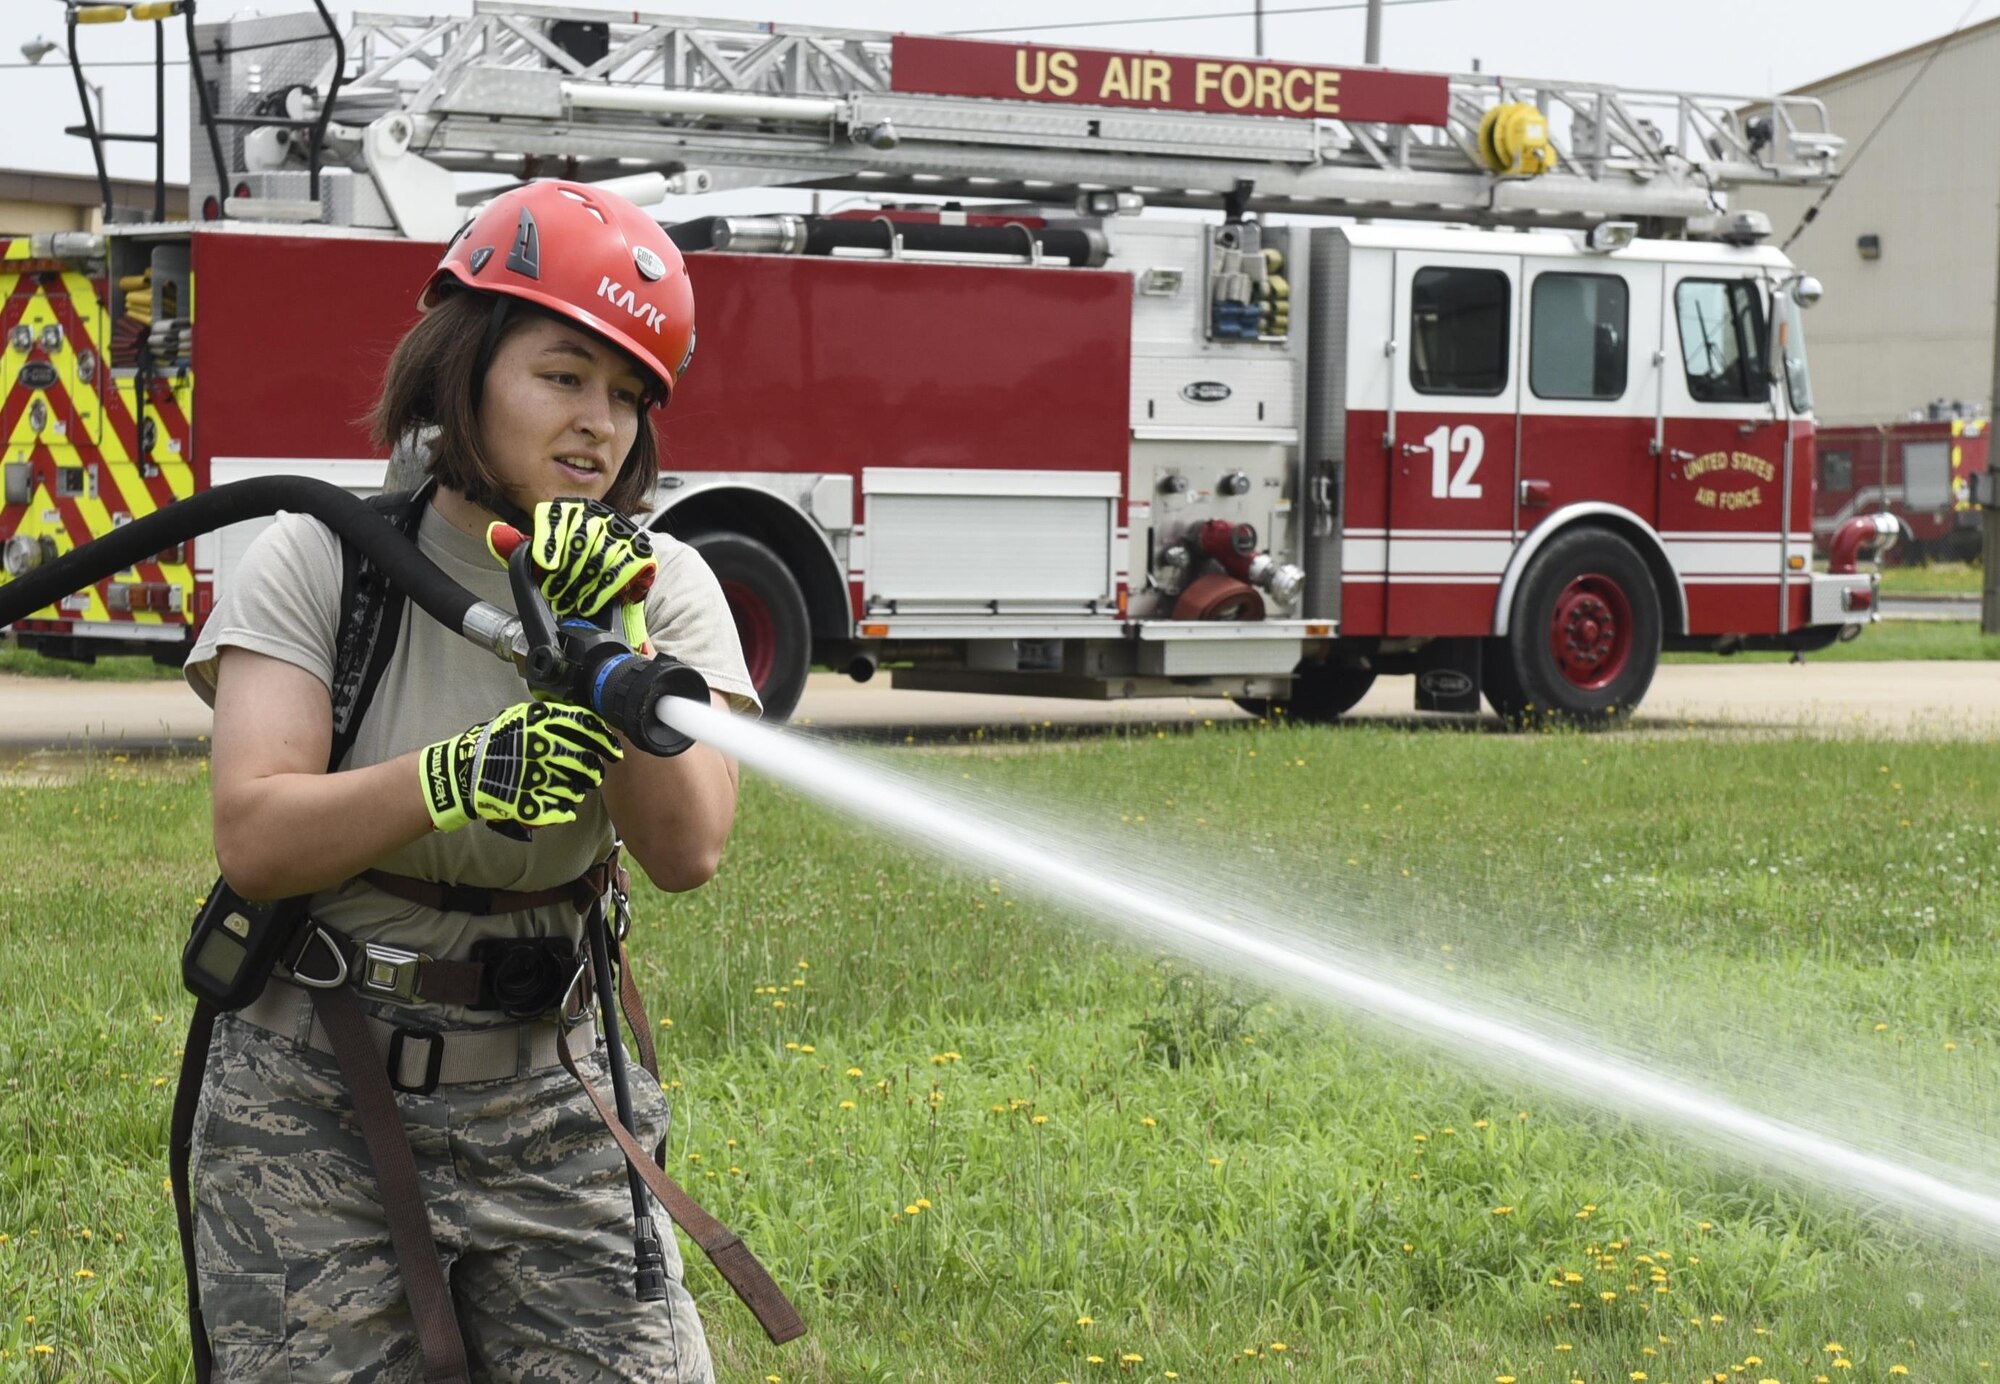 U.S. Air Force Academy Cadet 2nd Class Madison Tung sprays a fire hose during a fire training challenge at Kunsan Air Base, Republic of Korea, July 11, 2017. The visit was part of the Air Force Academy’s Operation Air Force program which allows cadets to travel different bases to learn about different careers and missions. (U.S. Air Force photo by Senior Airman Michael Hunsaker/Released)